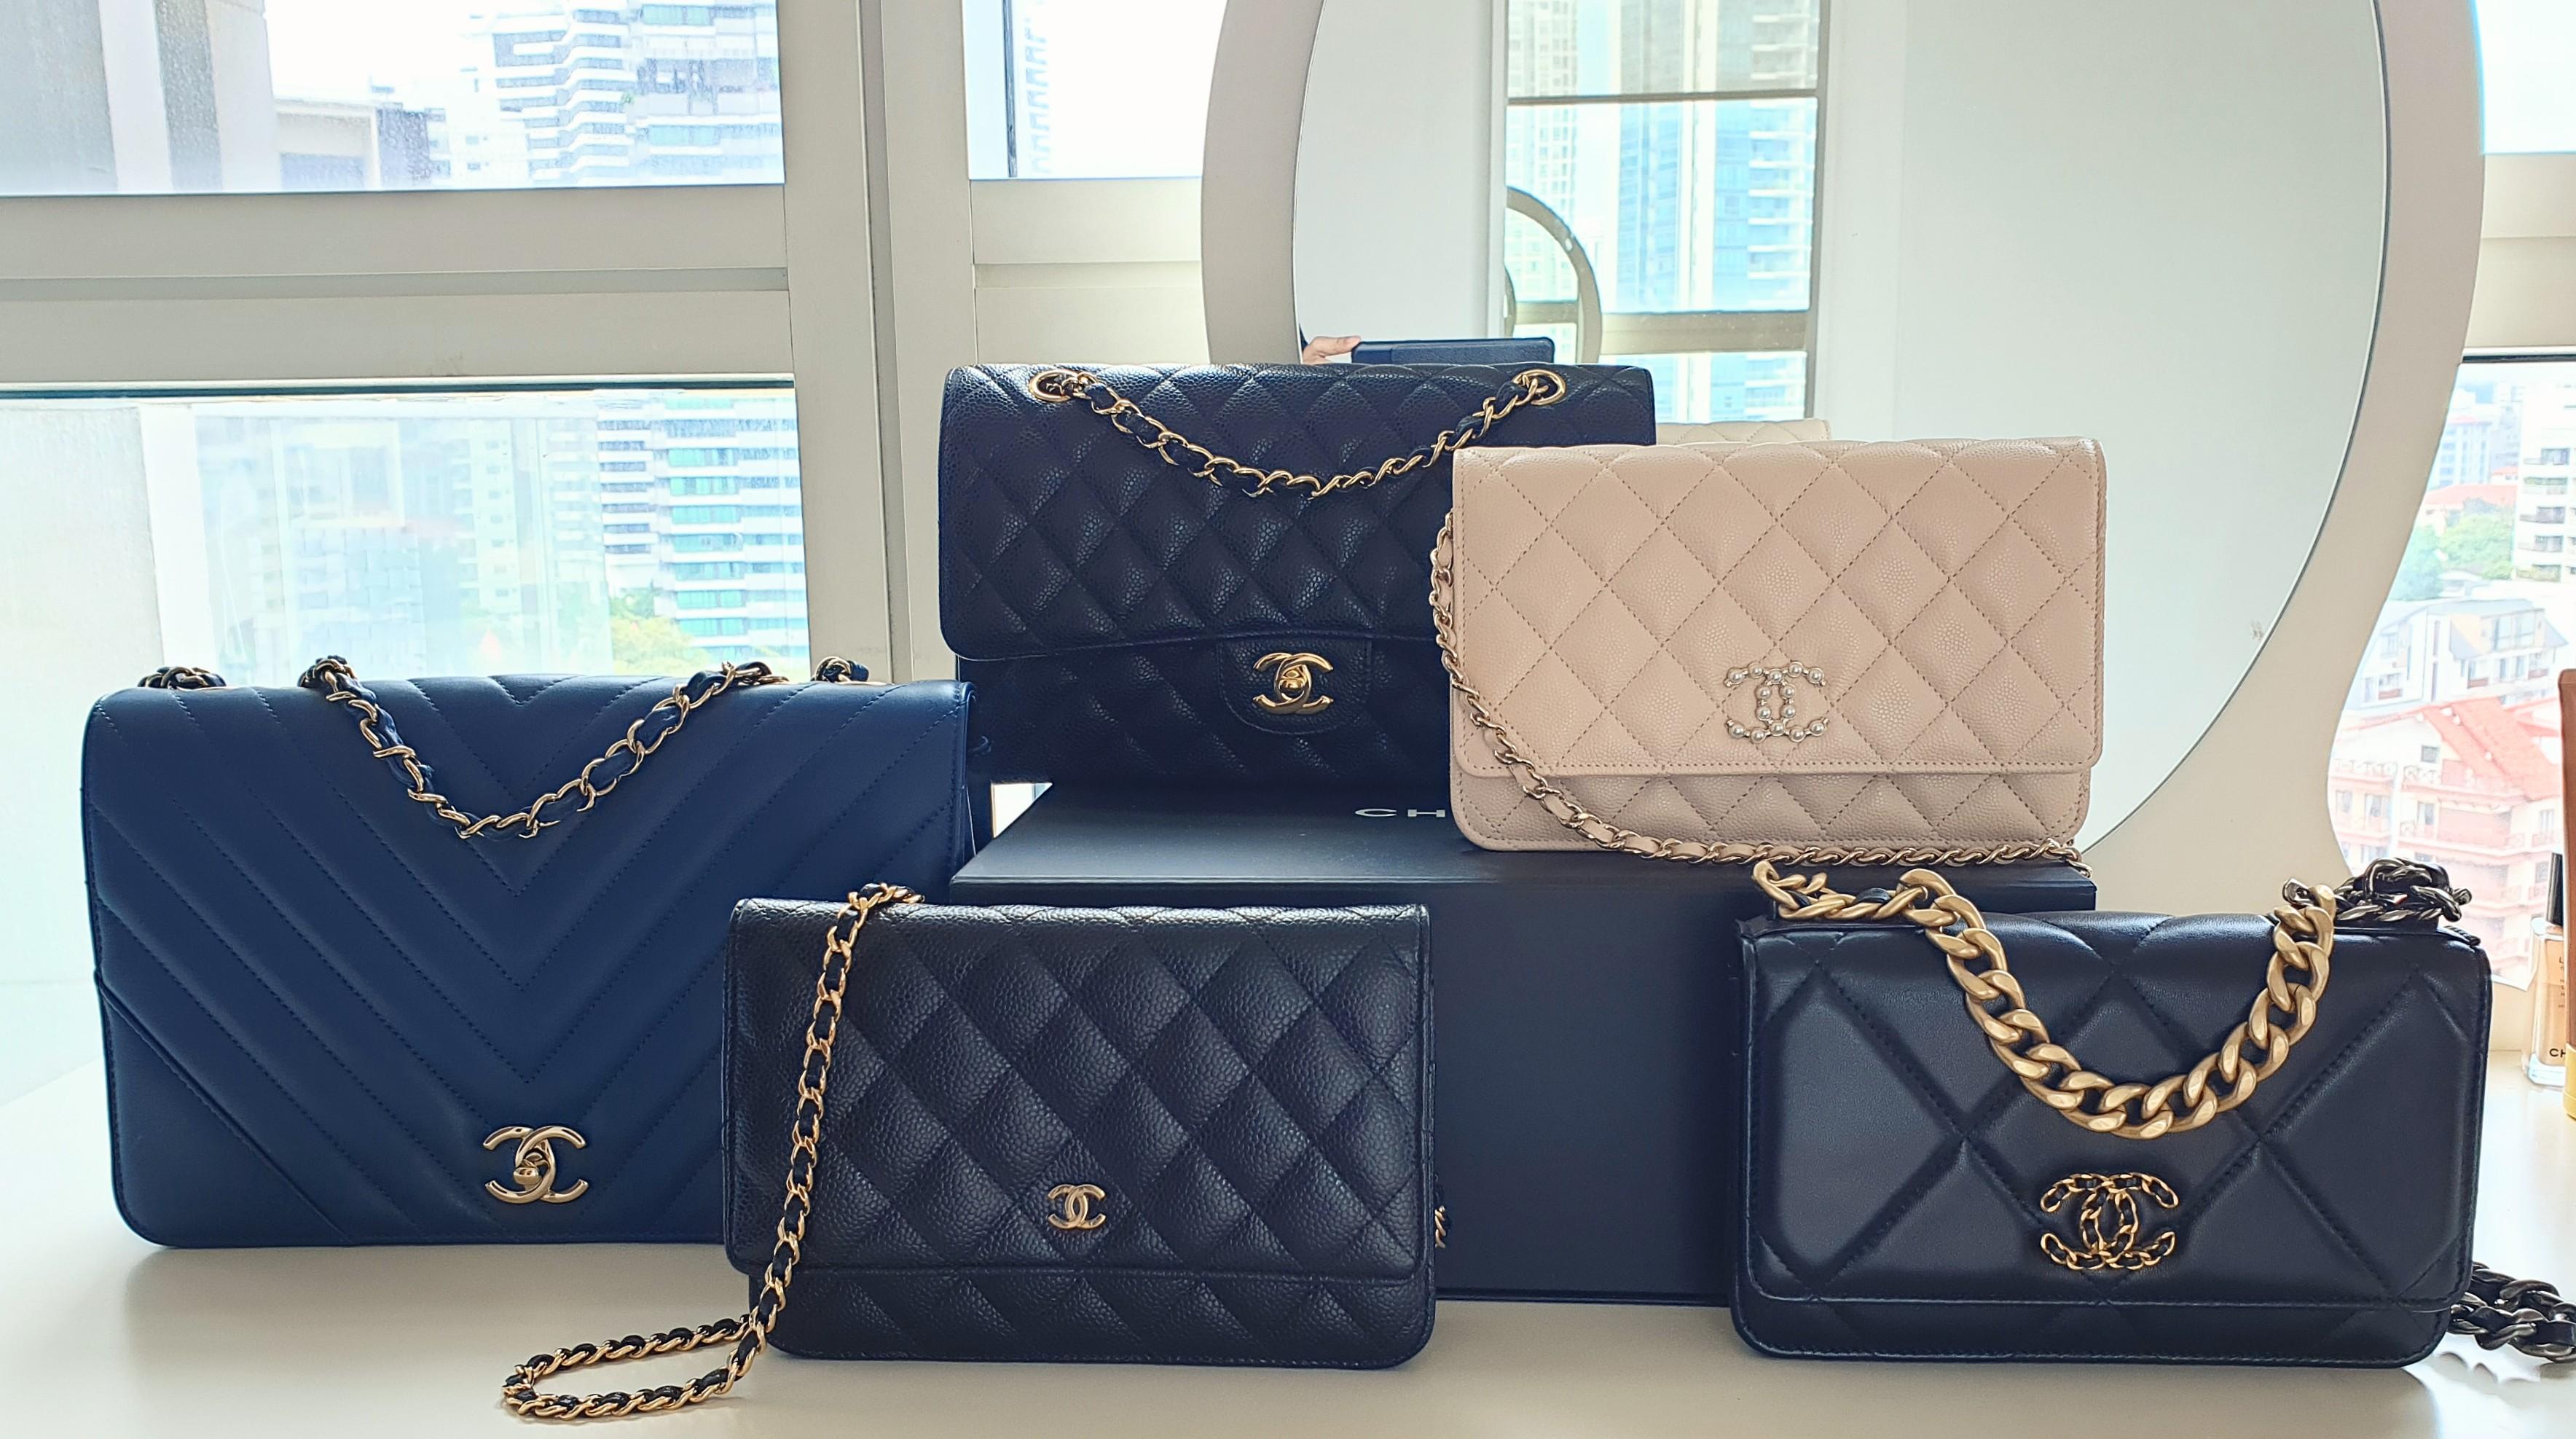 Comparison of LV Neverful MM and Chanel GST 